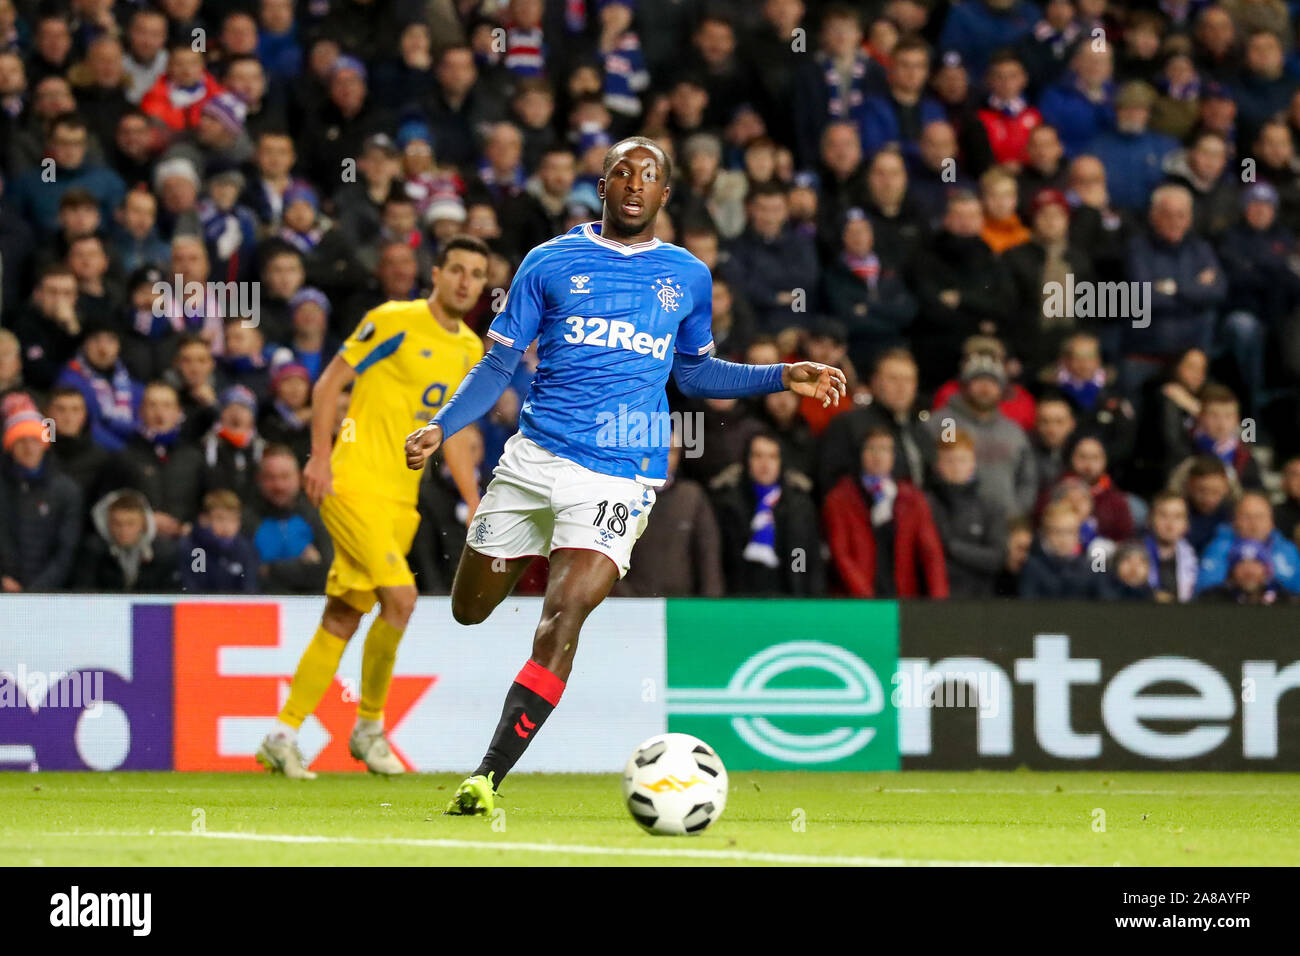 Glasgow, UK. 07th Nov, 2019. Glasgow Rangers played their fourth UEFA Europa League Group G fixture at their home ground, Ibrox Stadium, Glasgow against FC Porto from Portugal. This was the return match against Porto when the score was a draw at 1 -1 at Estádio do Dragão and this was an important game for both teams. Rangers won 2 -0. Credit: Findlay/Alamy Live News Stock Photo